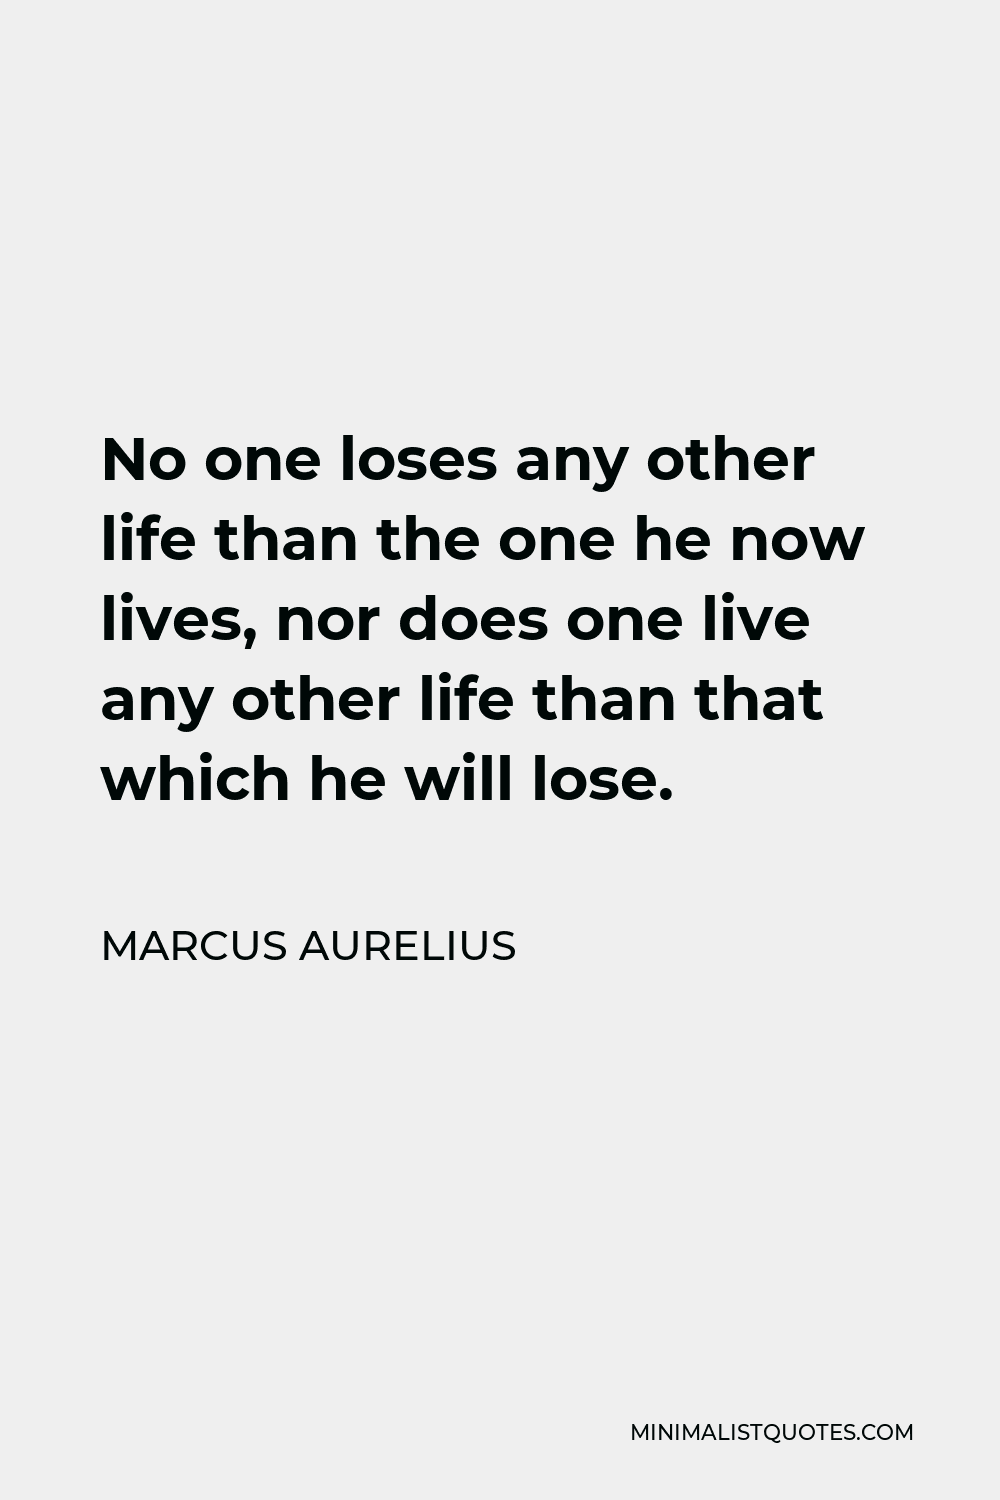 Marcus Aurelius Quote - No one loses any other life than the one he now lives, nor does one live any other life than that which he will lose.